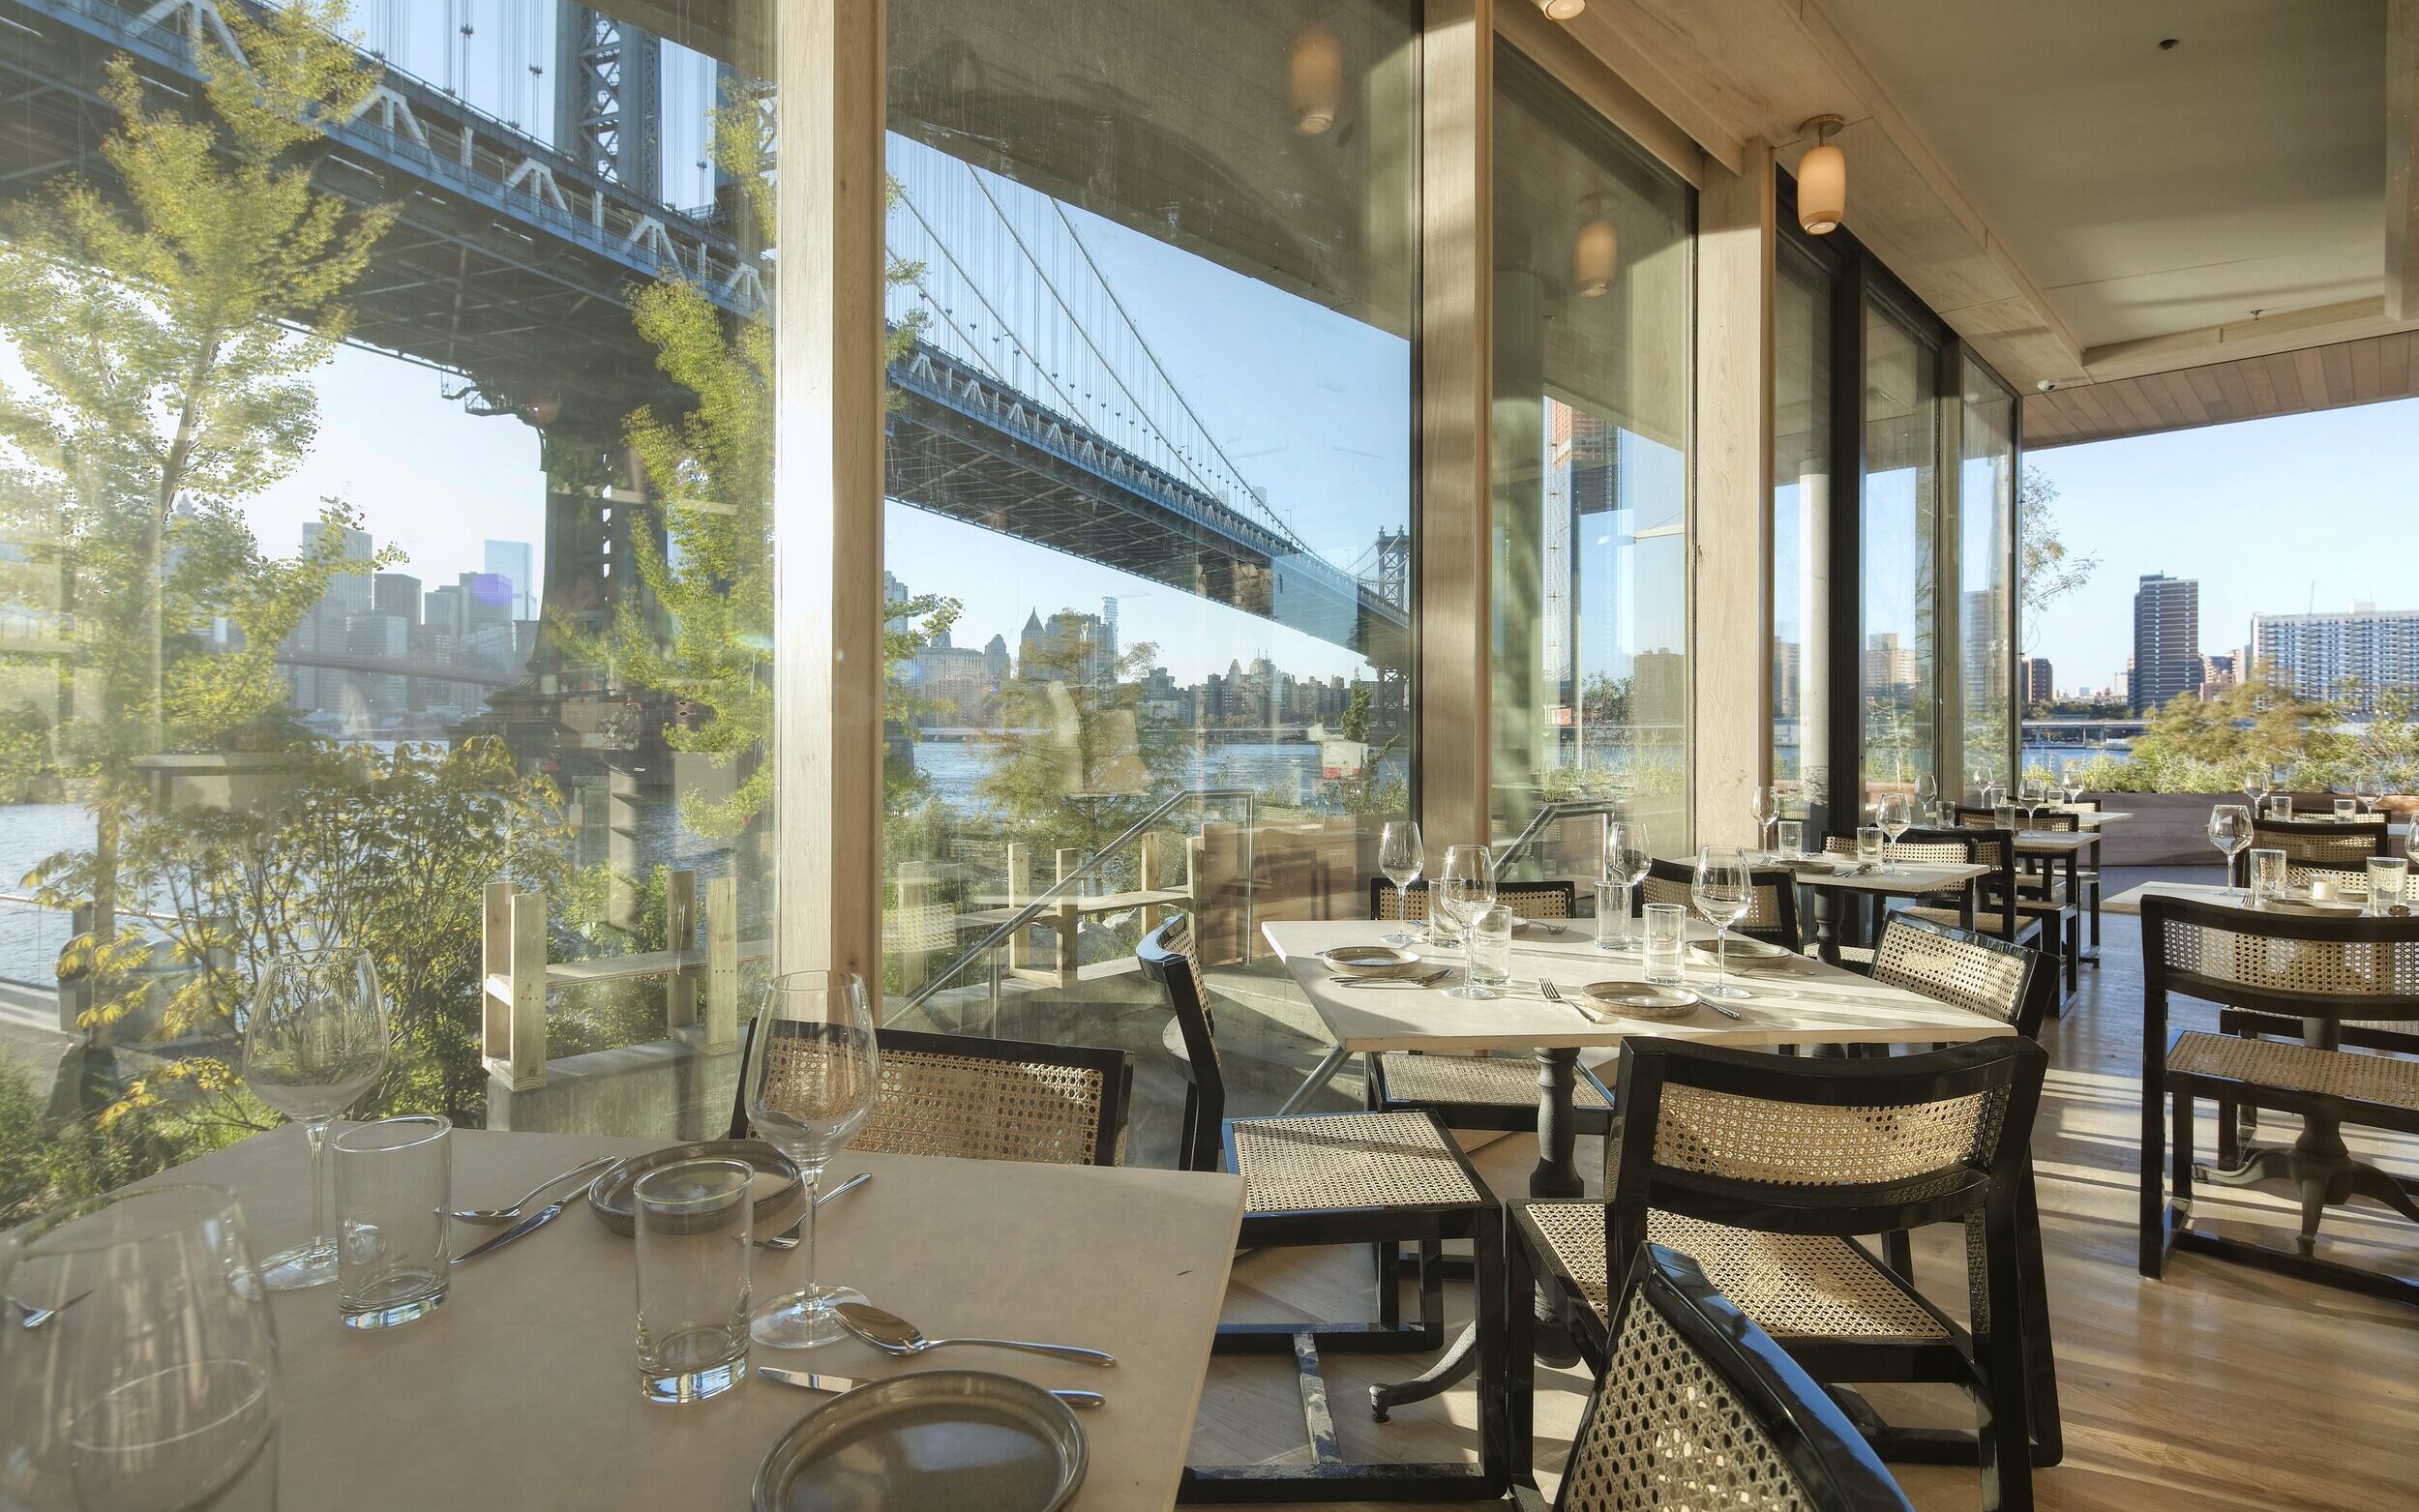 This Waterfront Restaurant in Dumbo, Brooklyn, Boasts Unparalleled Views of the Manhattan Cityscape